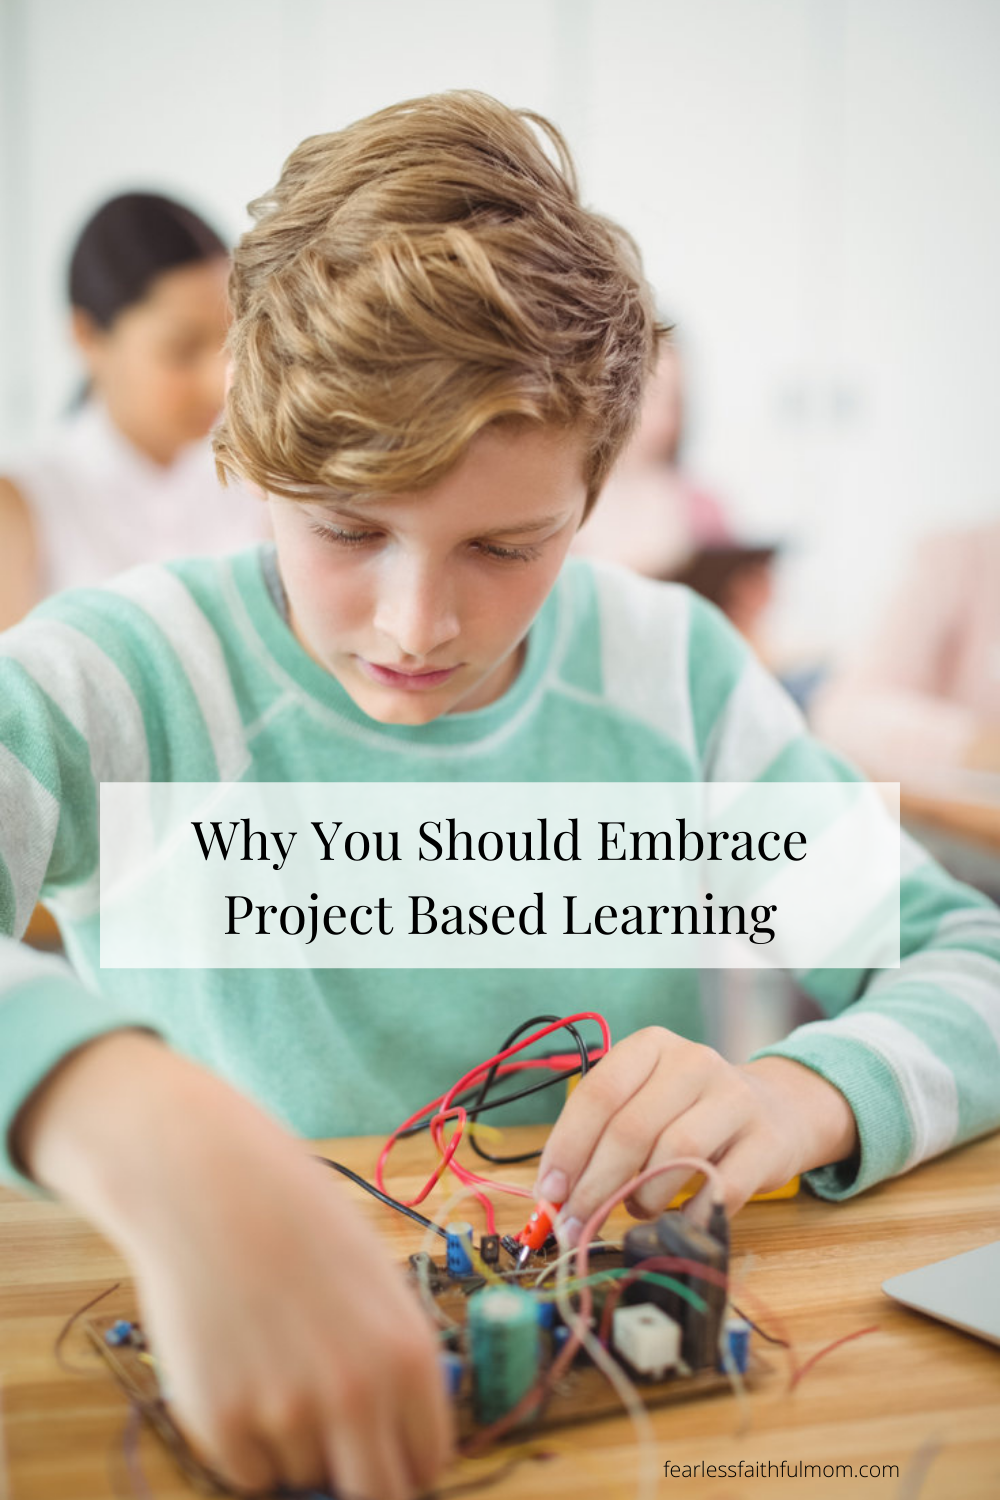 It's time to ditch the tests and embrace project based learning to help your kids explore their passions and prepare for the future.